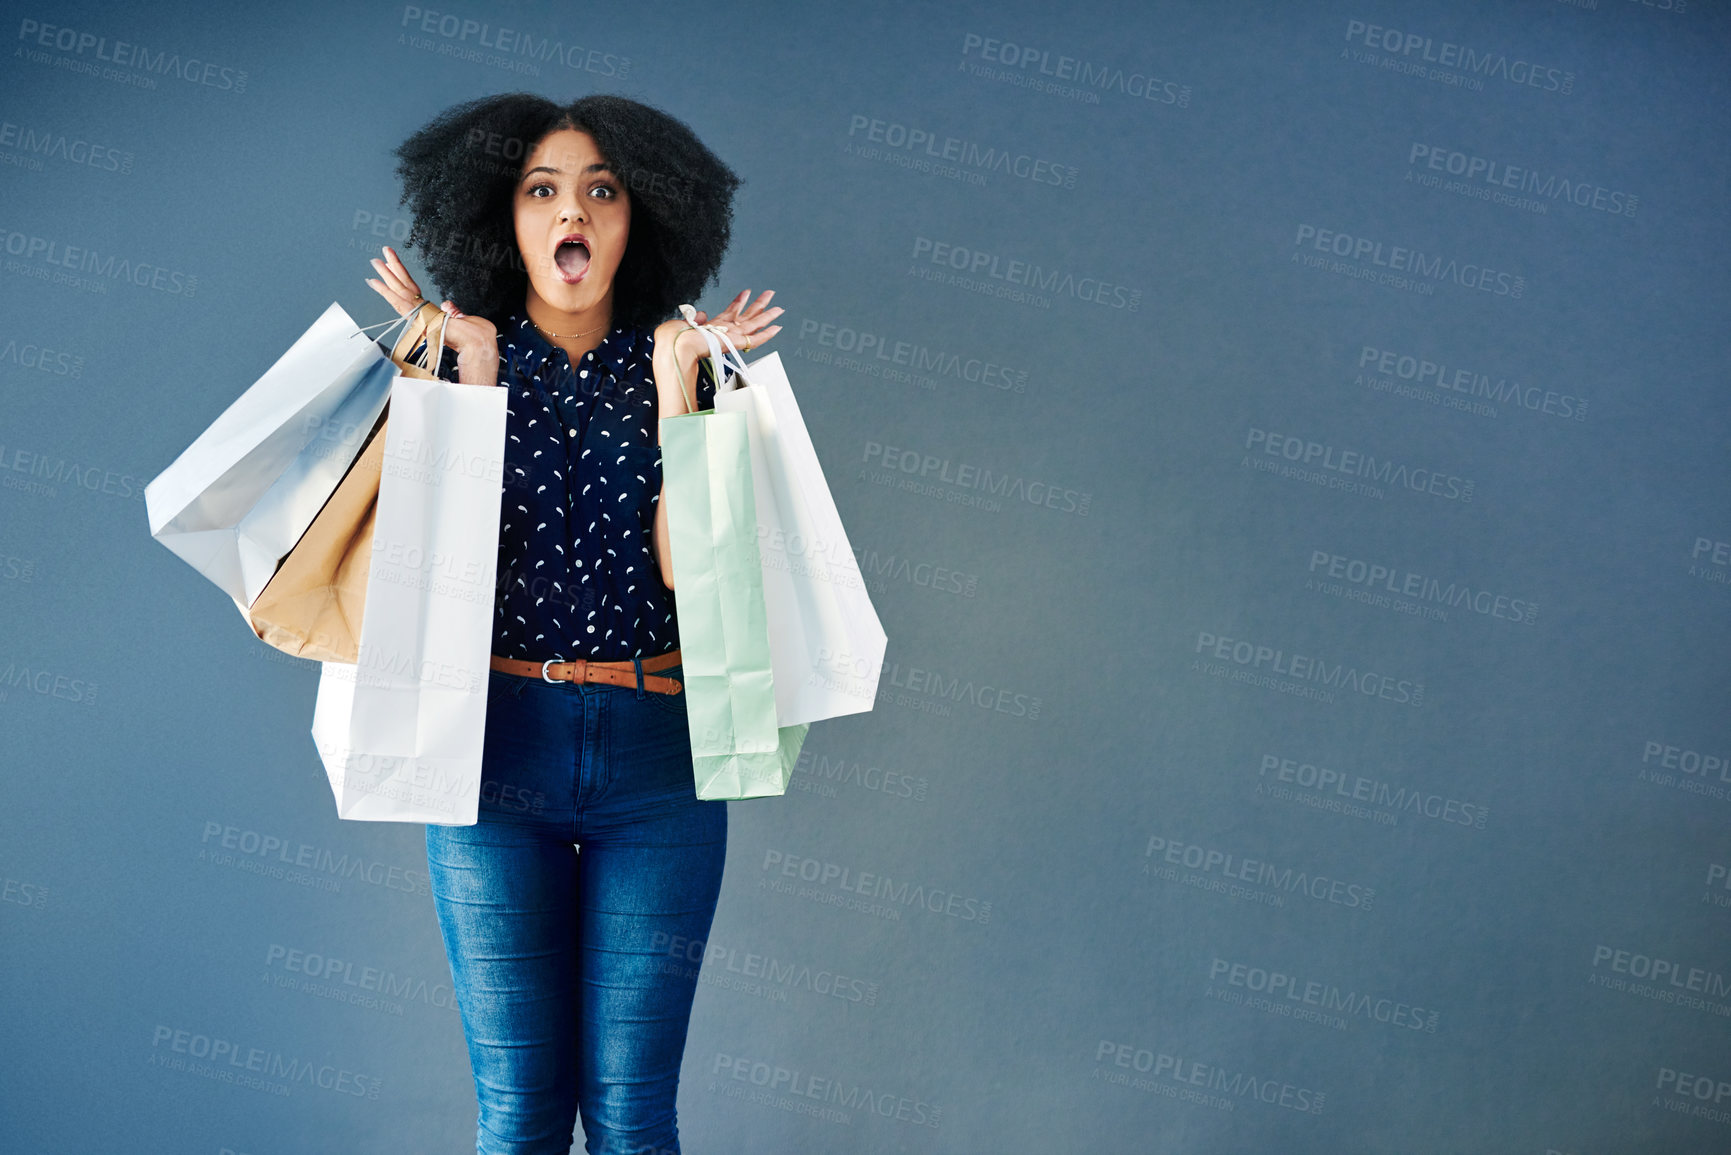 Buy stock photo Studio portrait of a young woman carrying shopping bags and looking surprised against a blue background